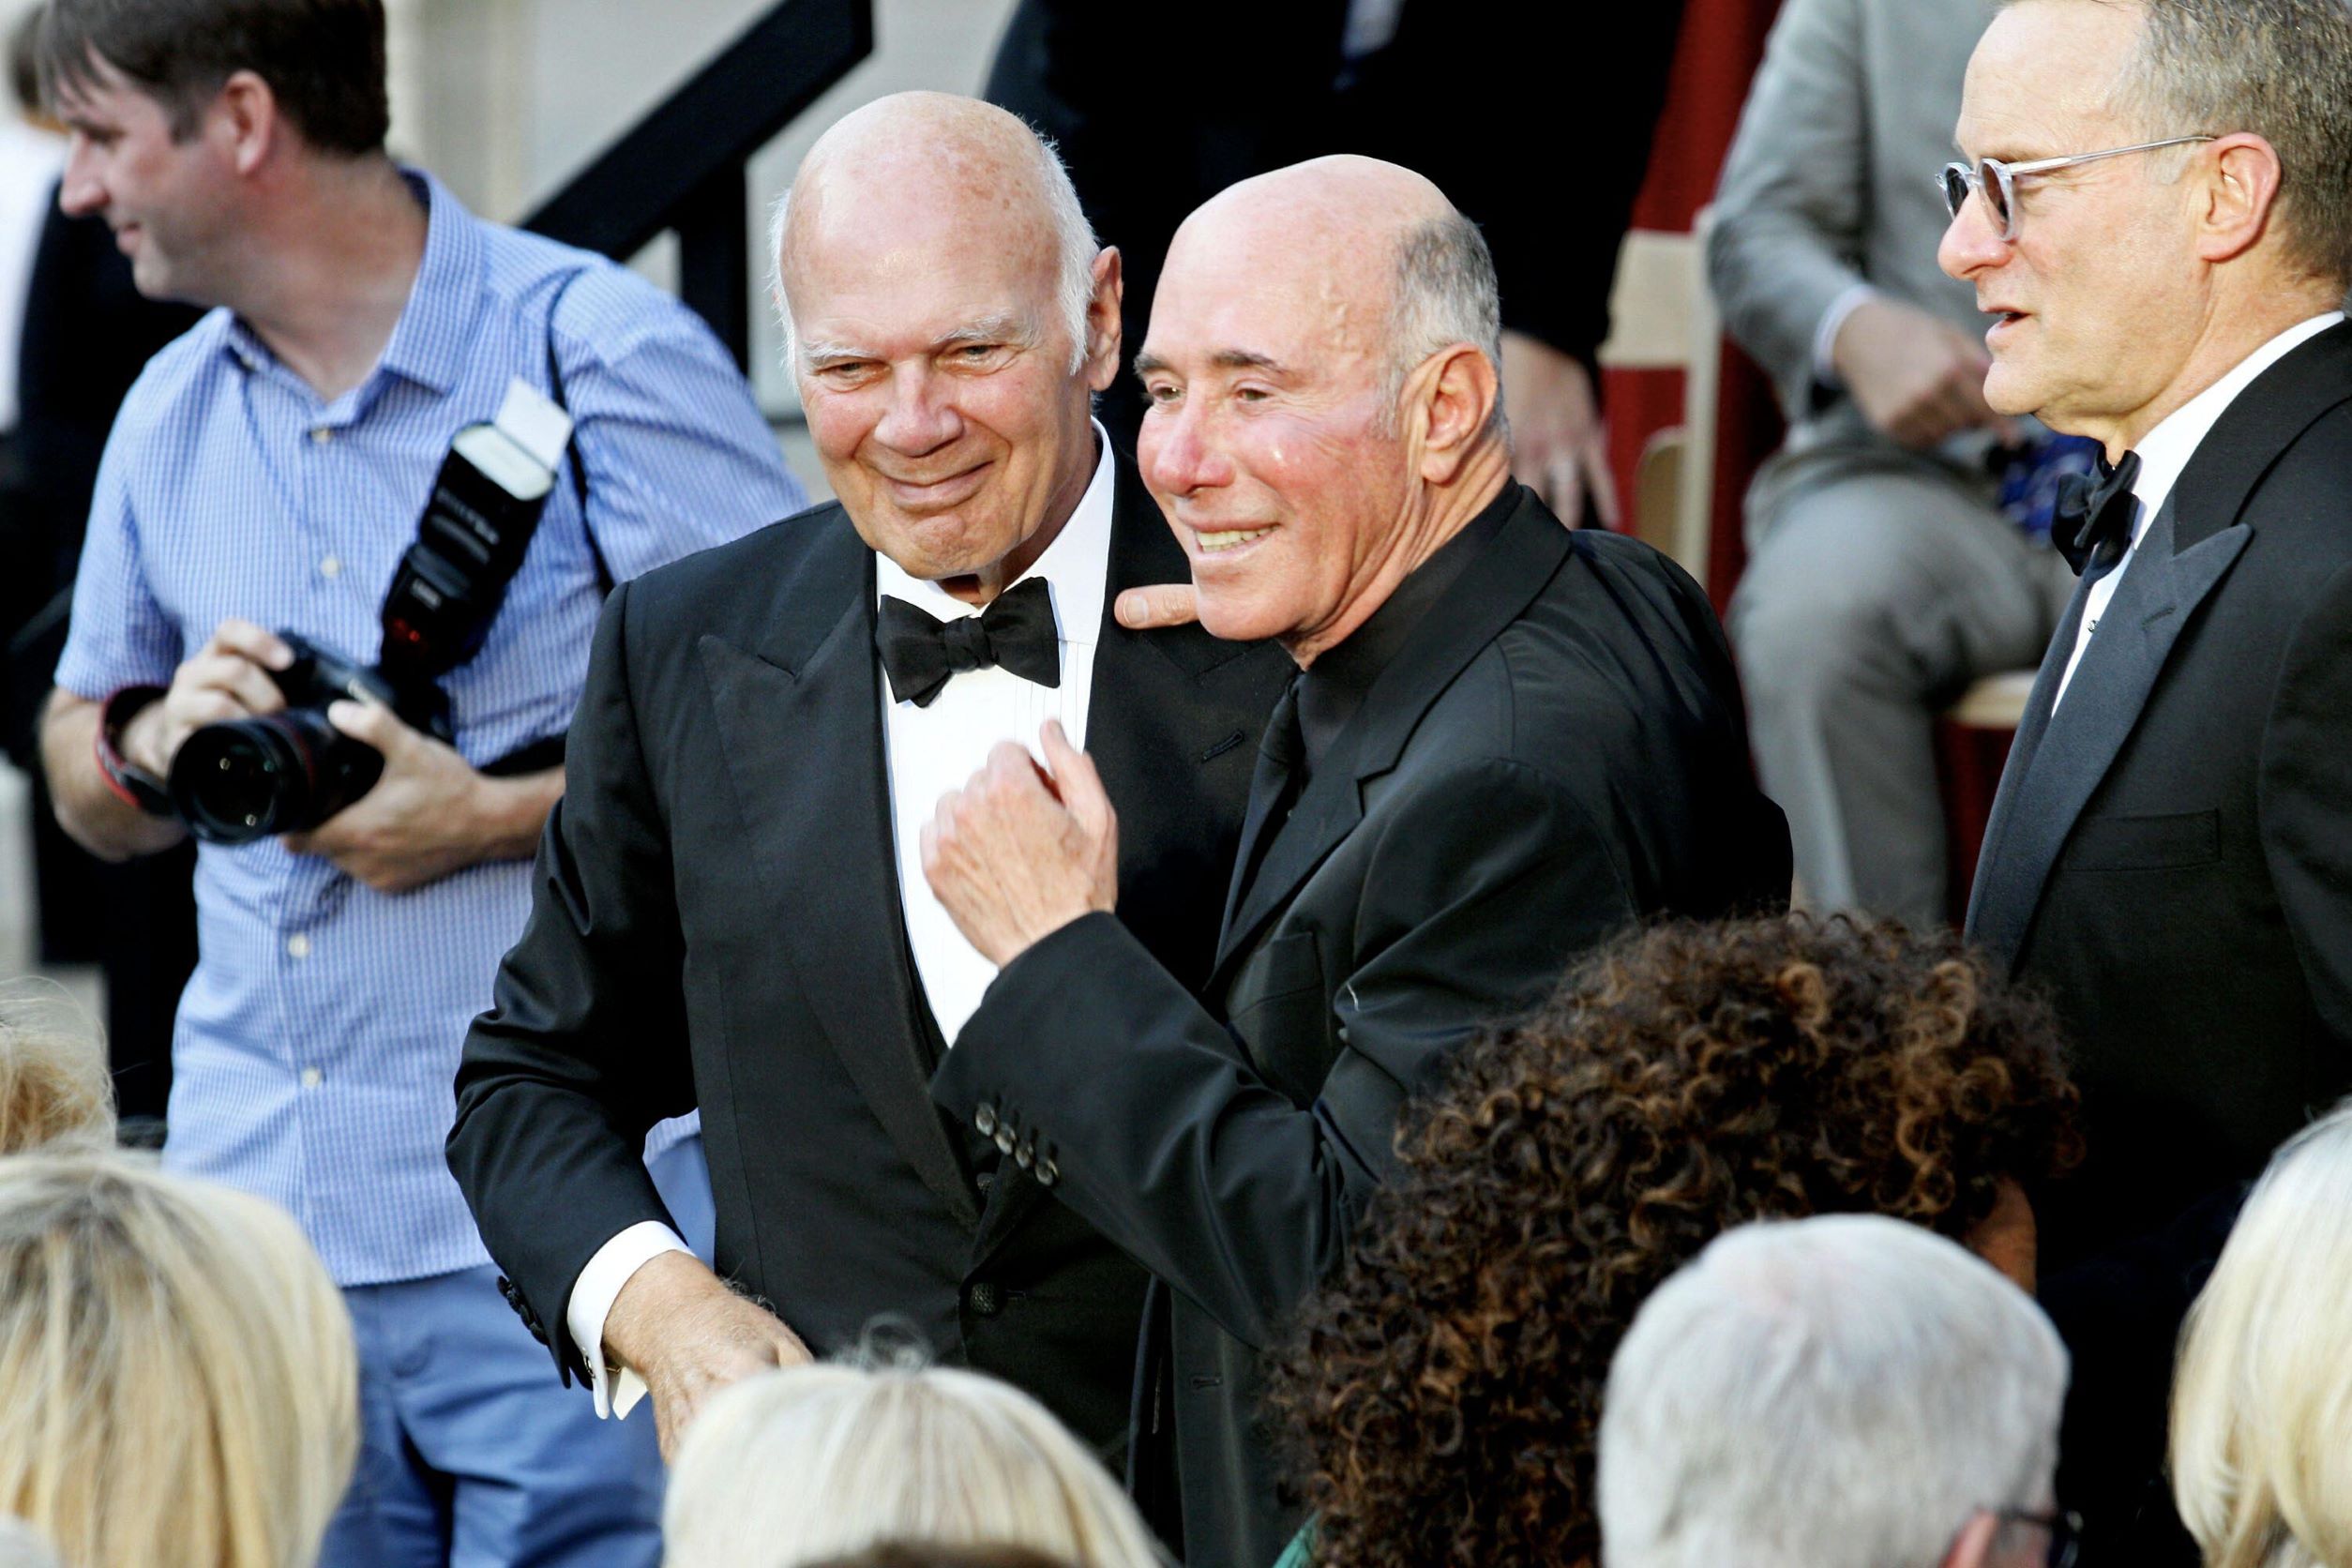 Steven Roth, David Geffen at the David Geffen Hall Renaming Ceremony & The New York Philharmonic's 2015-16 Opening Gala Concert at the Josie Robertson Plaza at Lincoln Center. Steve Mack/Alamy